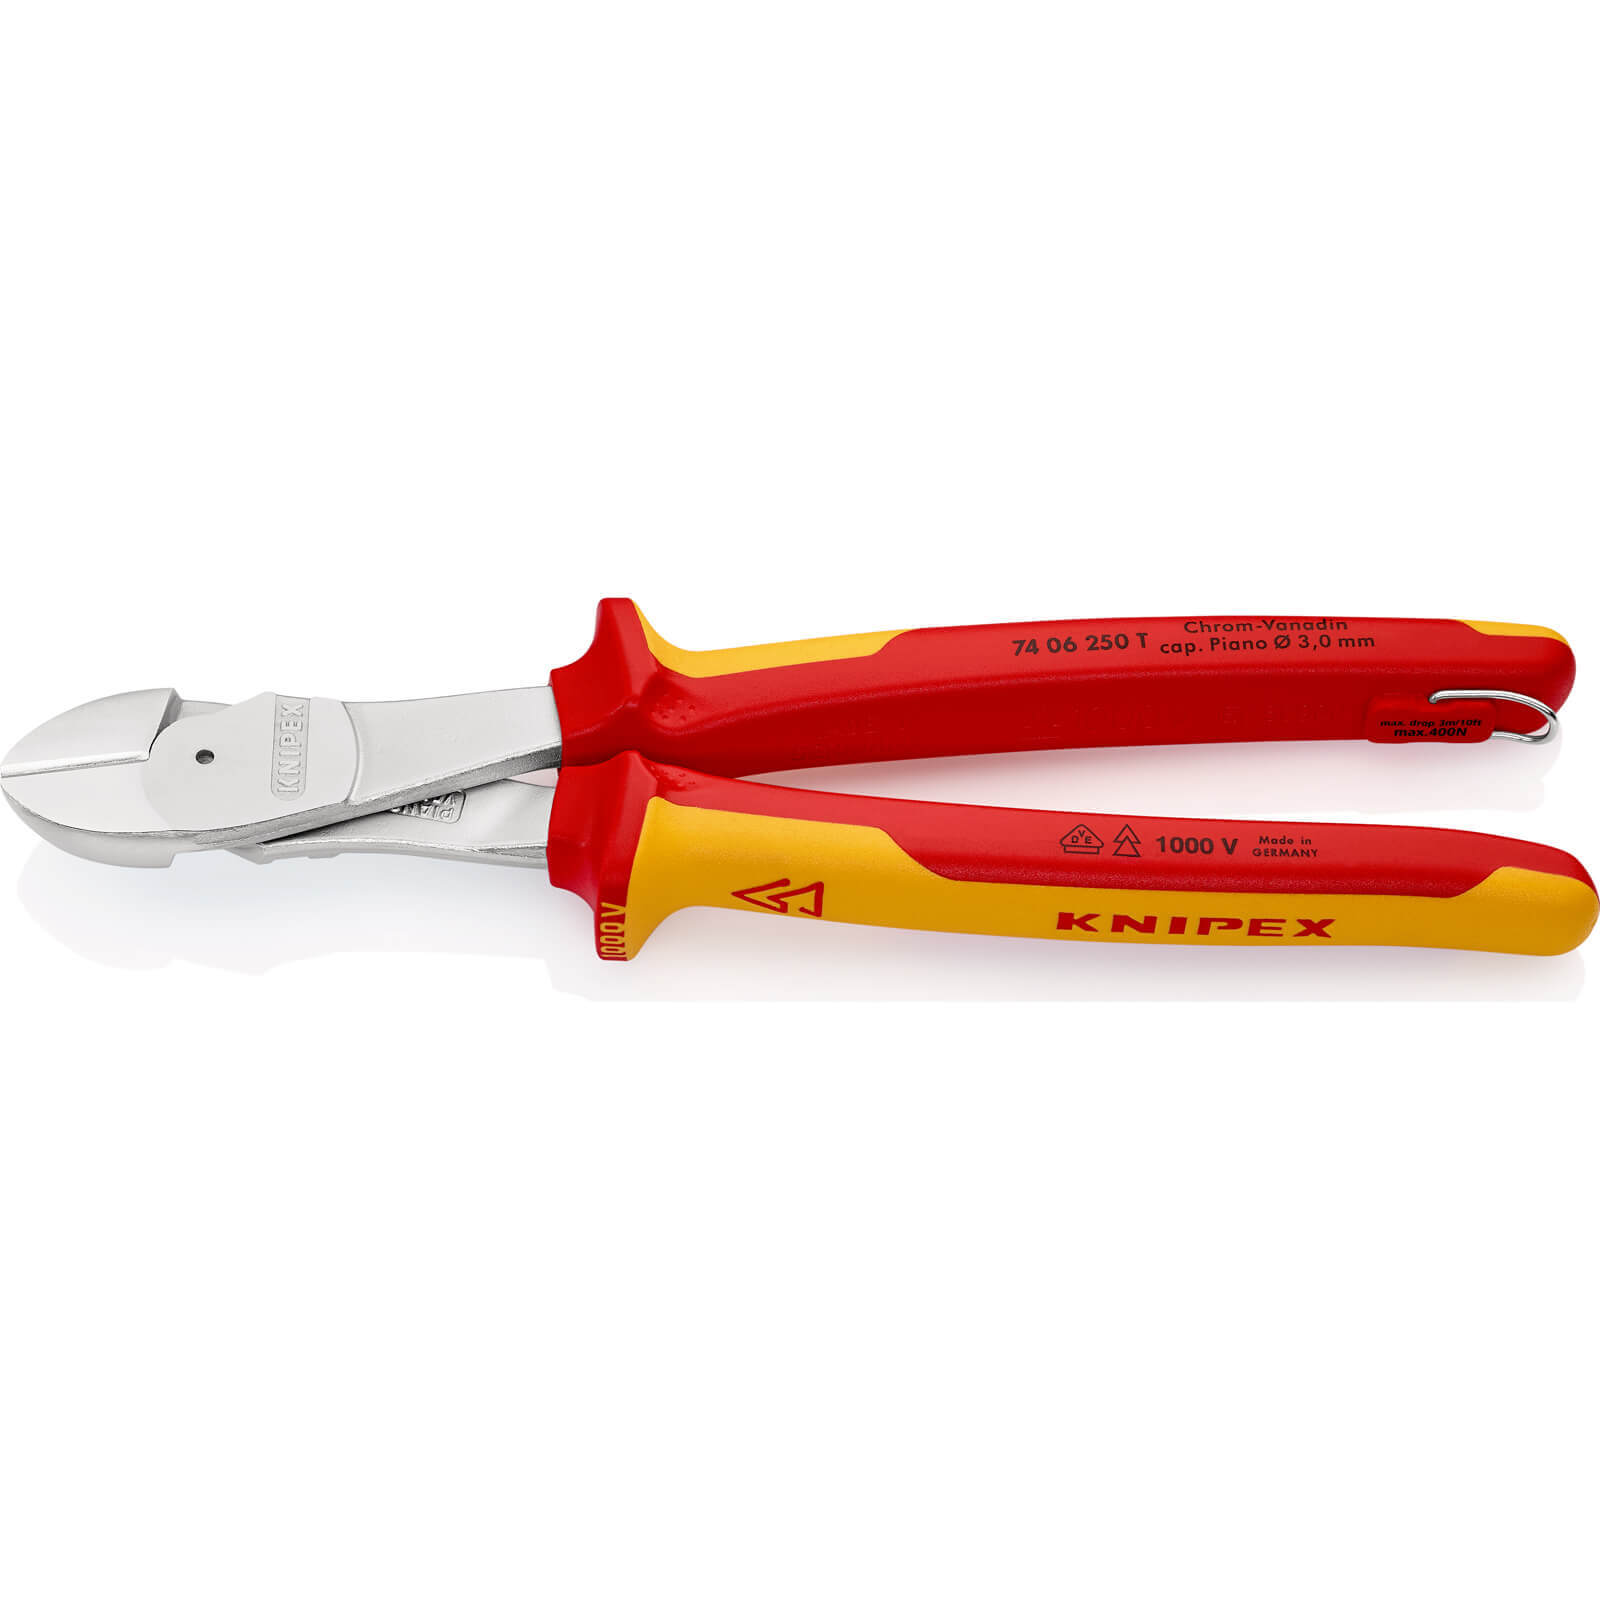 Knipex 74 06 VDE Insulated High Leverage Tethered Diagonal Cutting Pliers 250mm